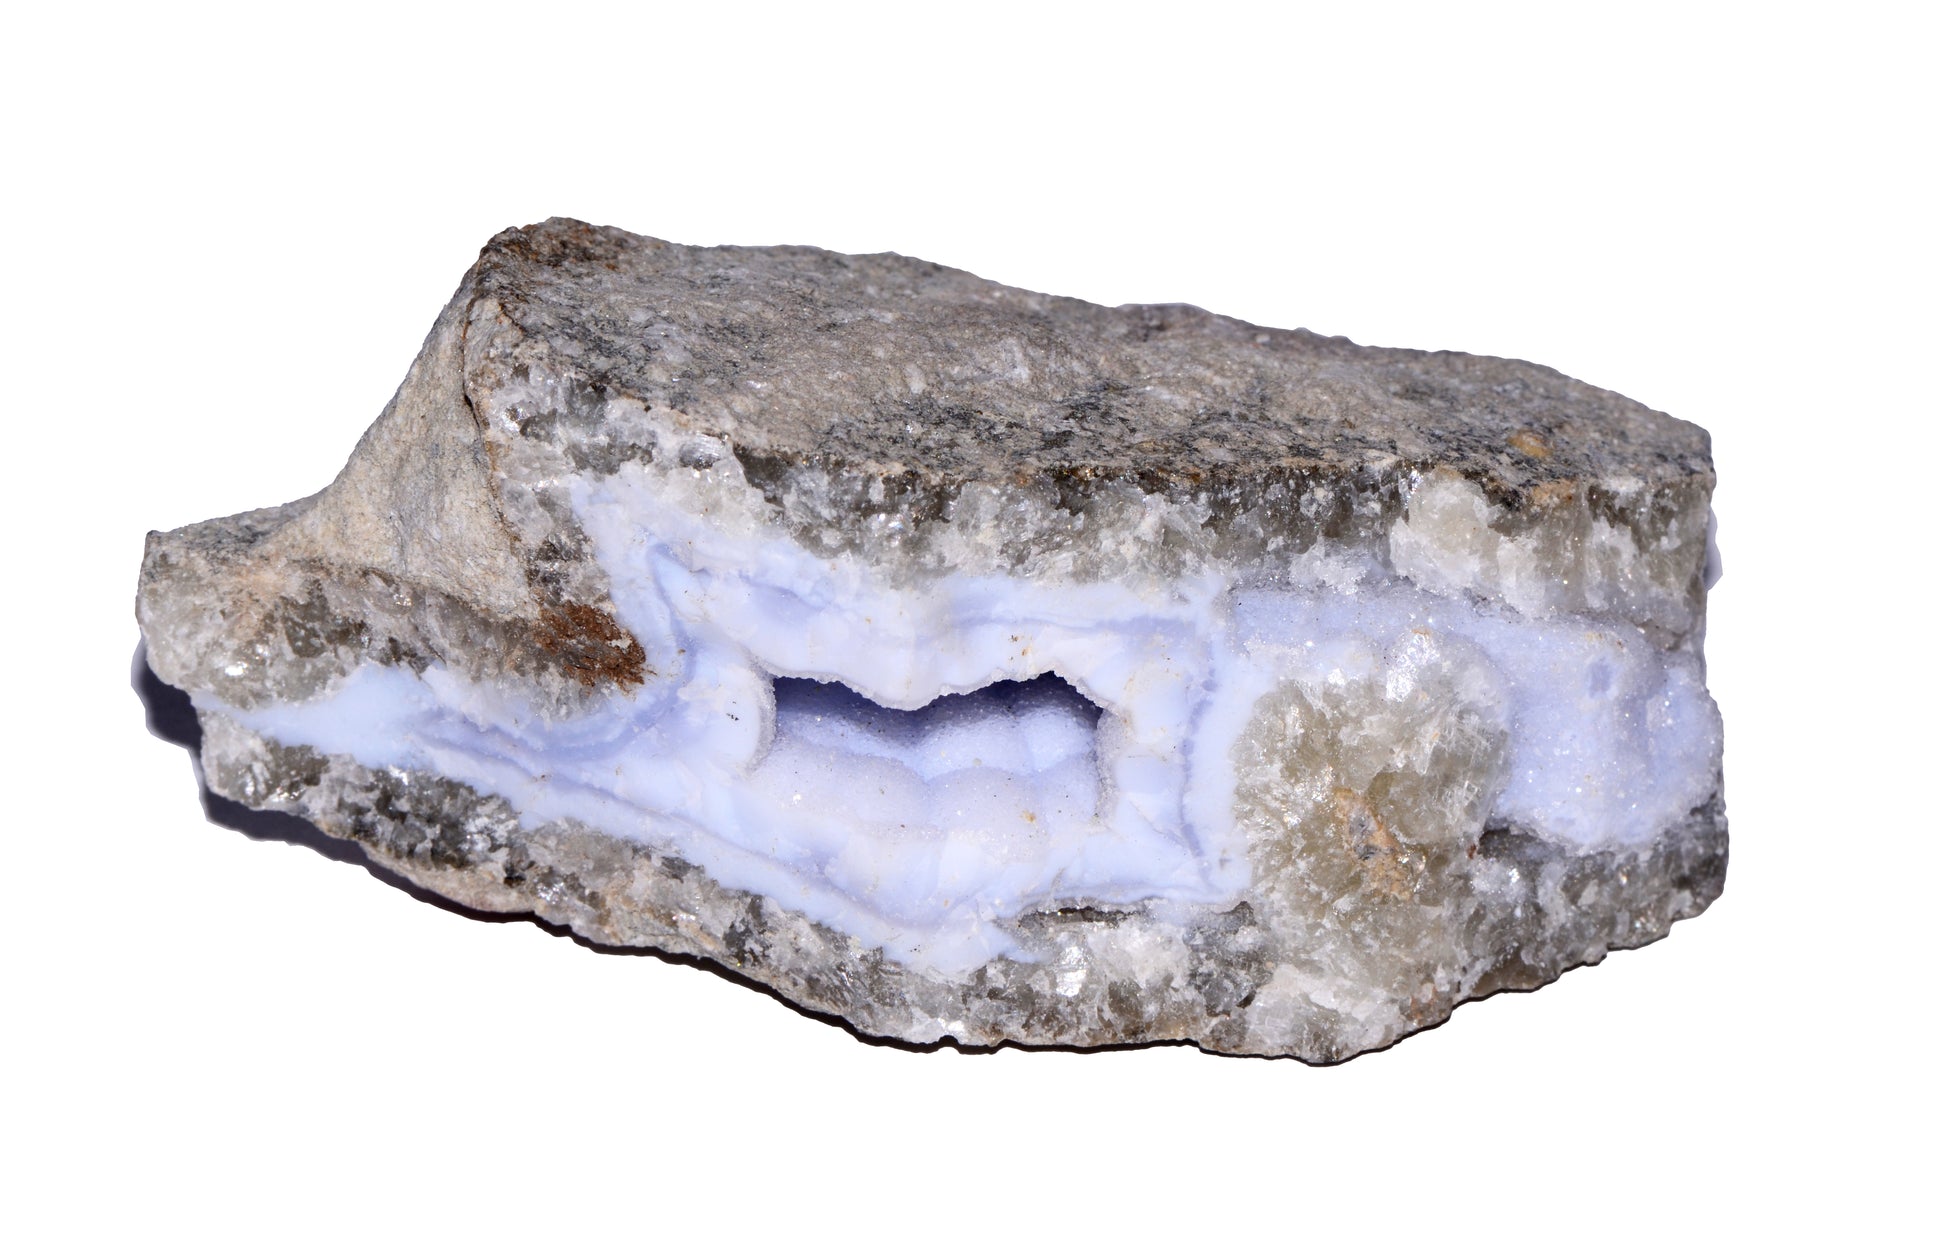 Blue Lace Agate Raw Form